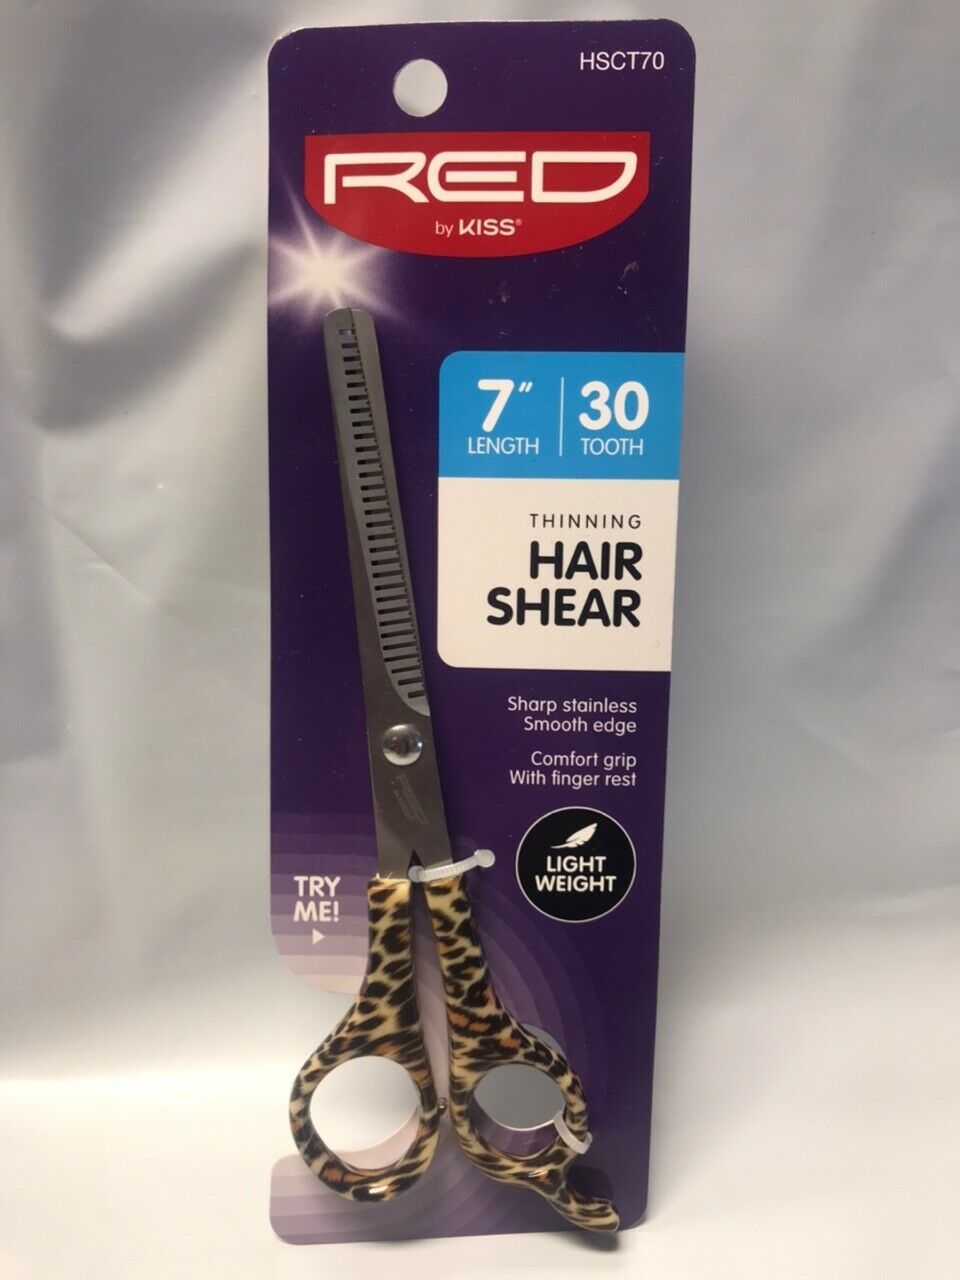 Primary image for RED by KISS 7" 30 TOOTH THINNING HAIR SHEAR HSCT70 STAINLESS SMOOTH EDGE